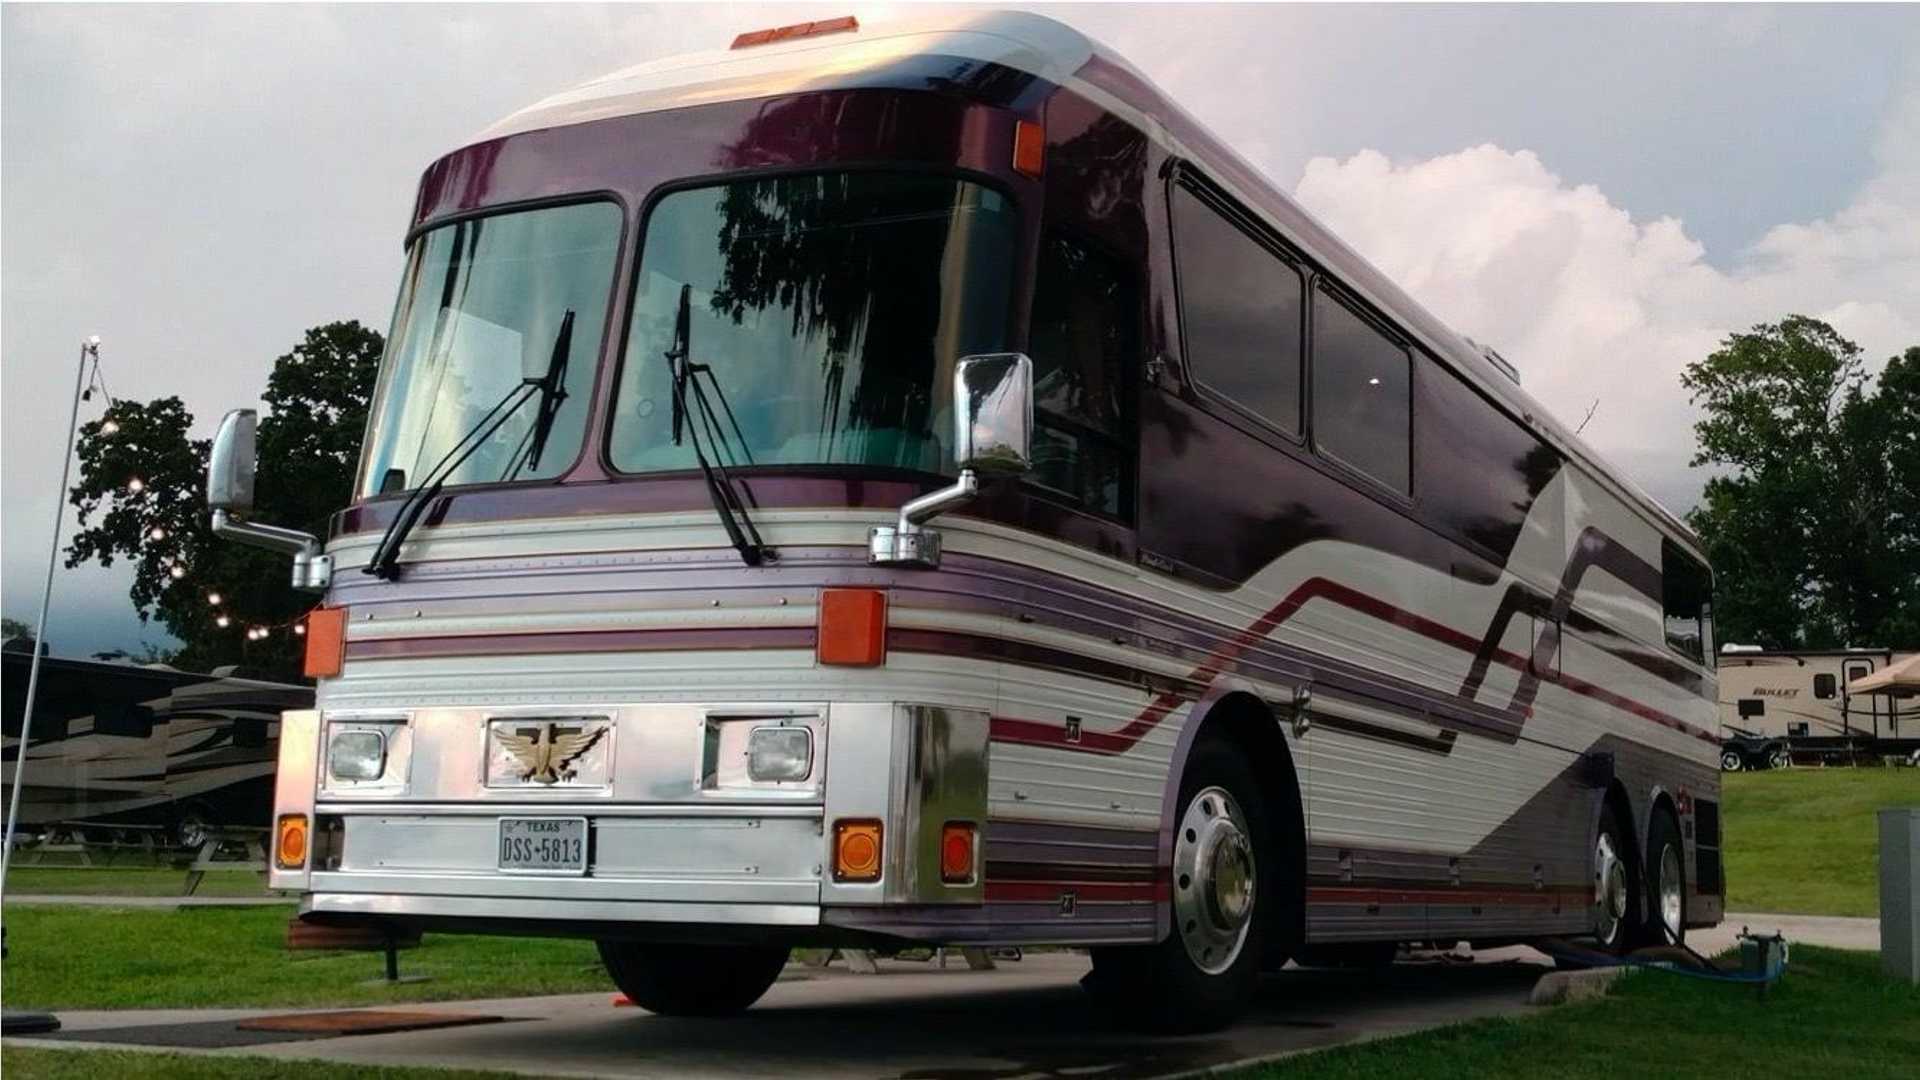 1983-eagle-model-10-motorcoach-owned-by-prince (2)